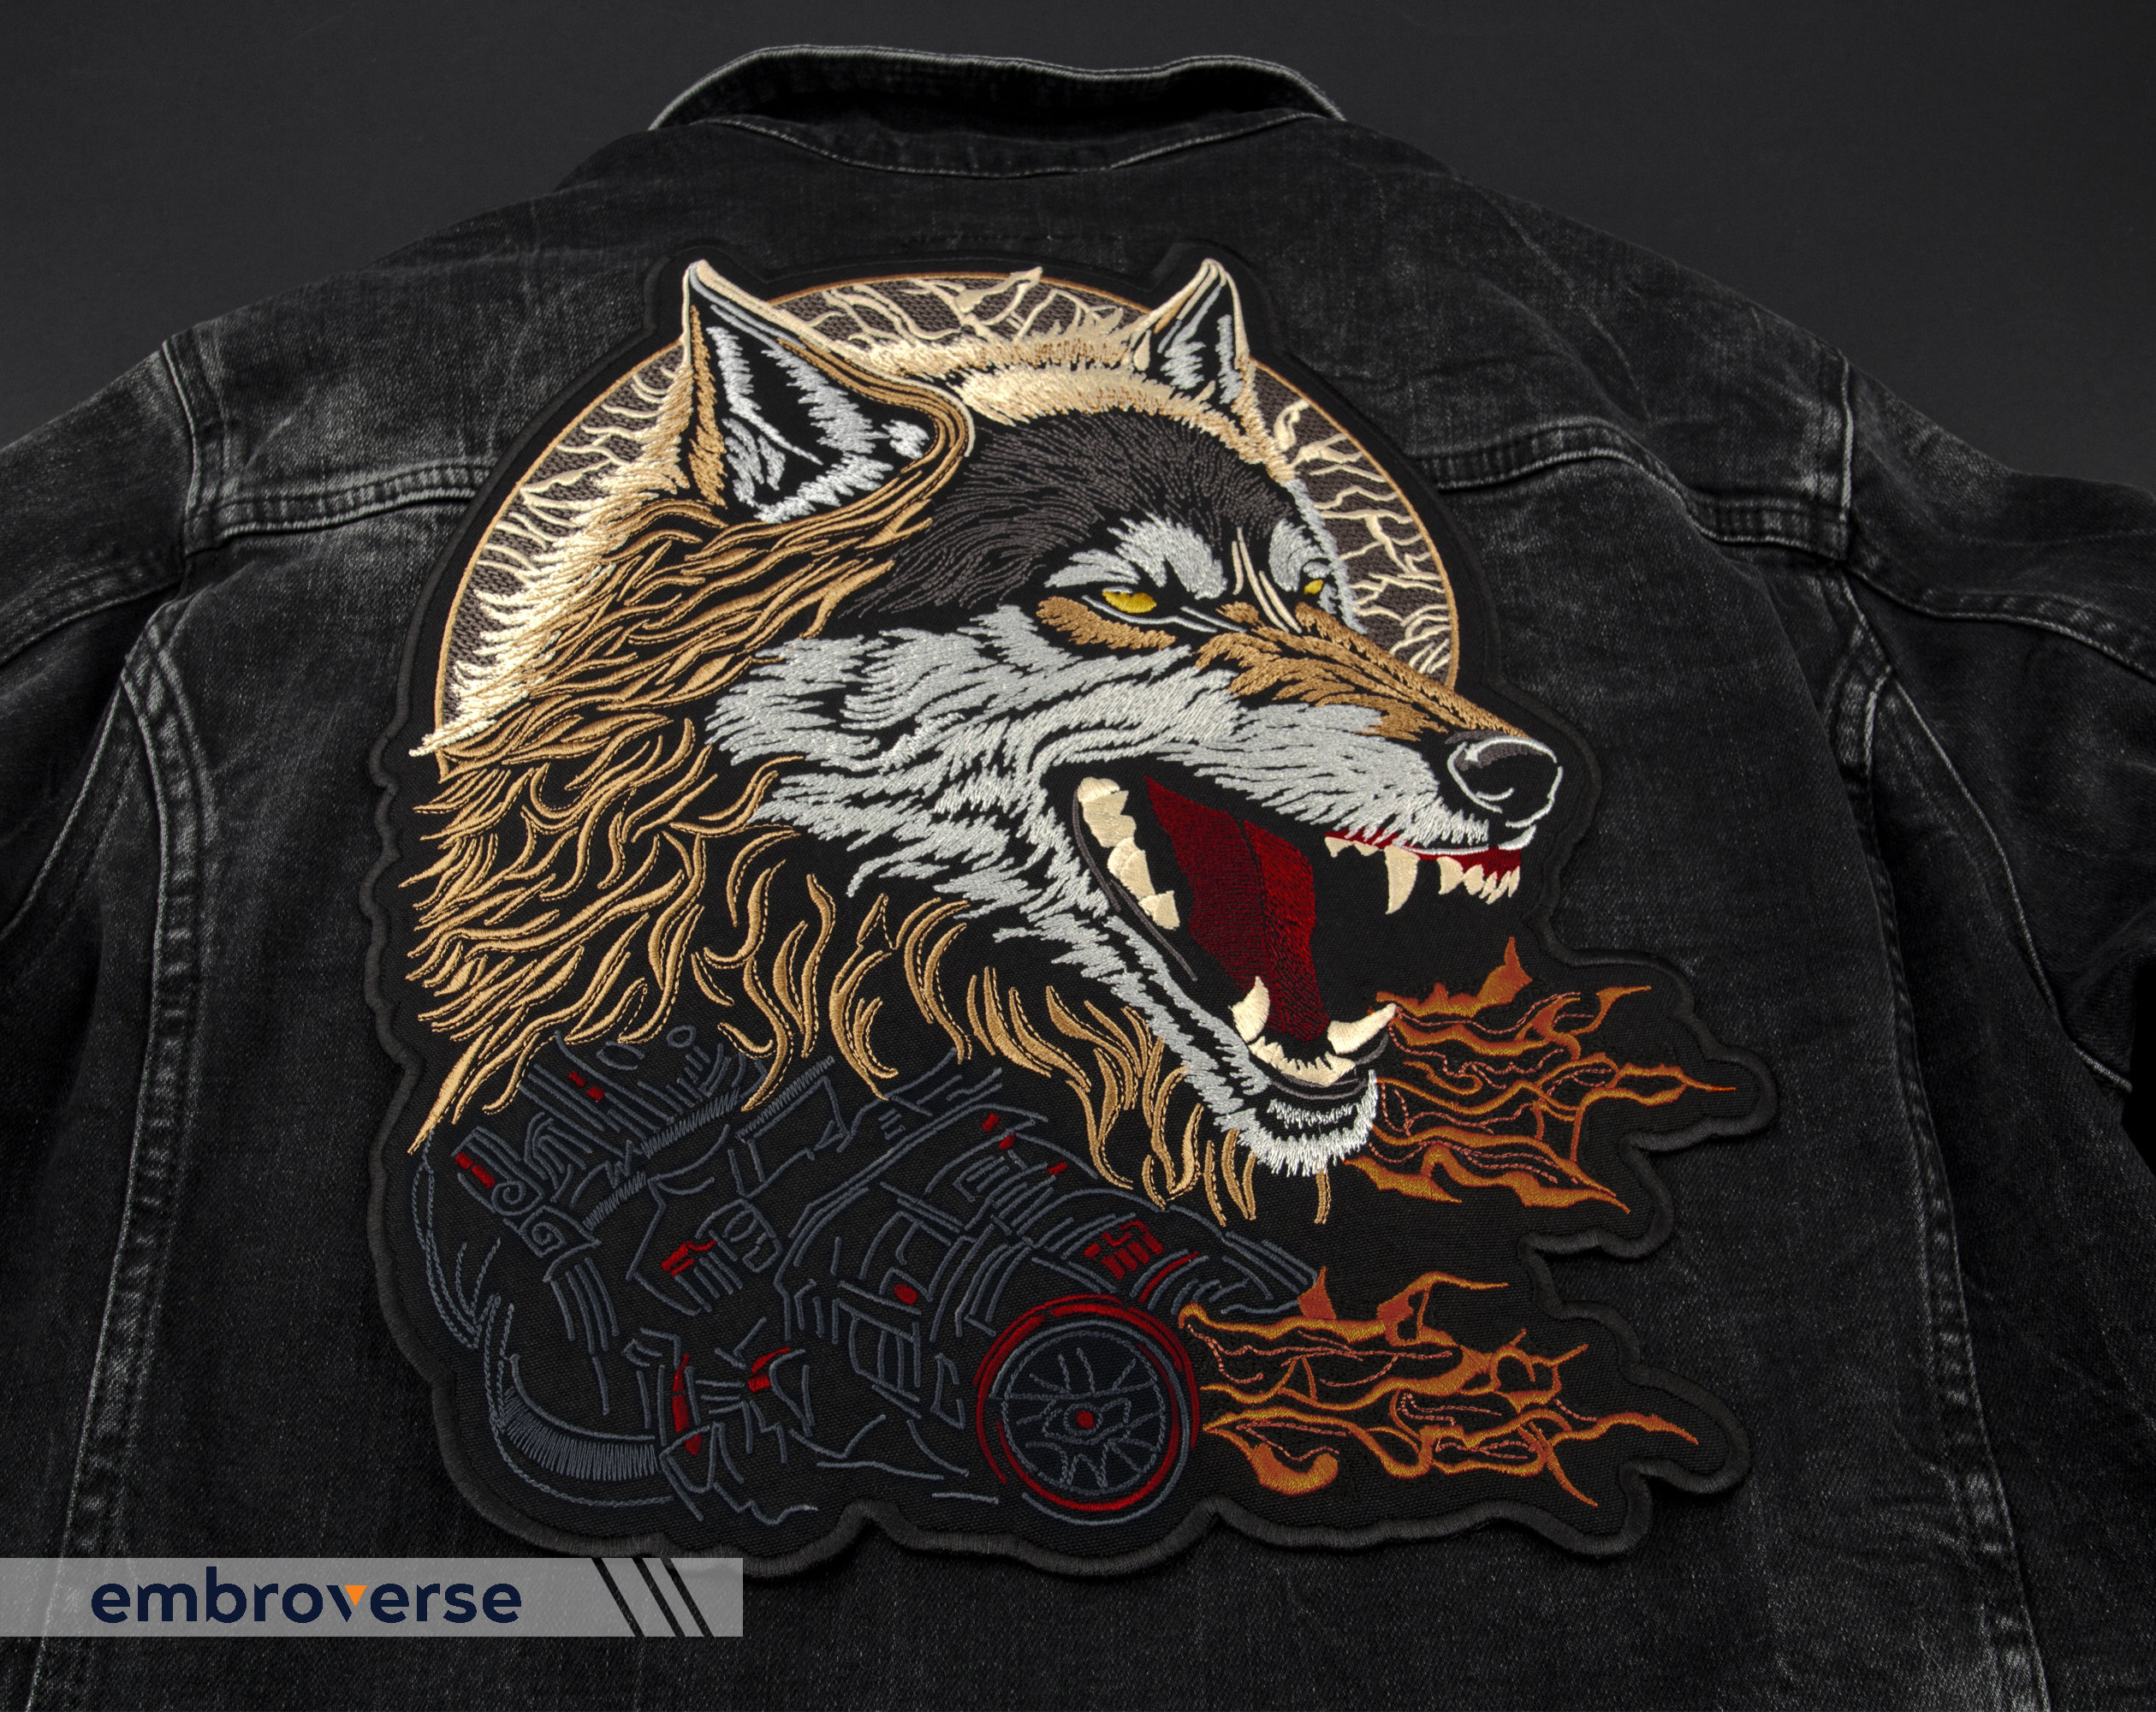 Lone Wolf Embroidered Patch, Biker Patches, Size: 3.9 x 3.9 inches